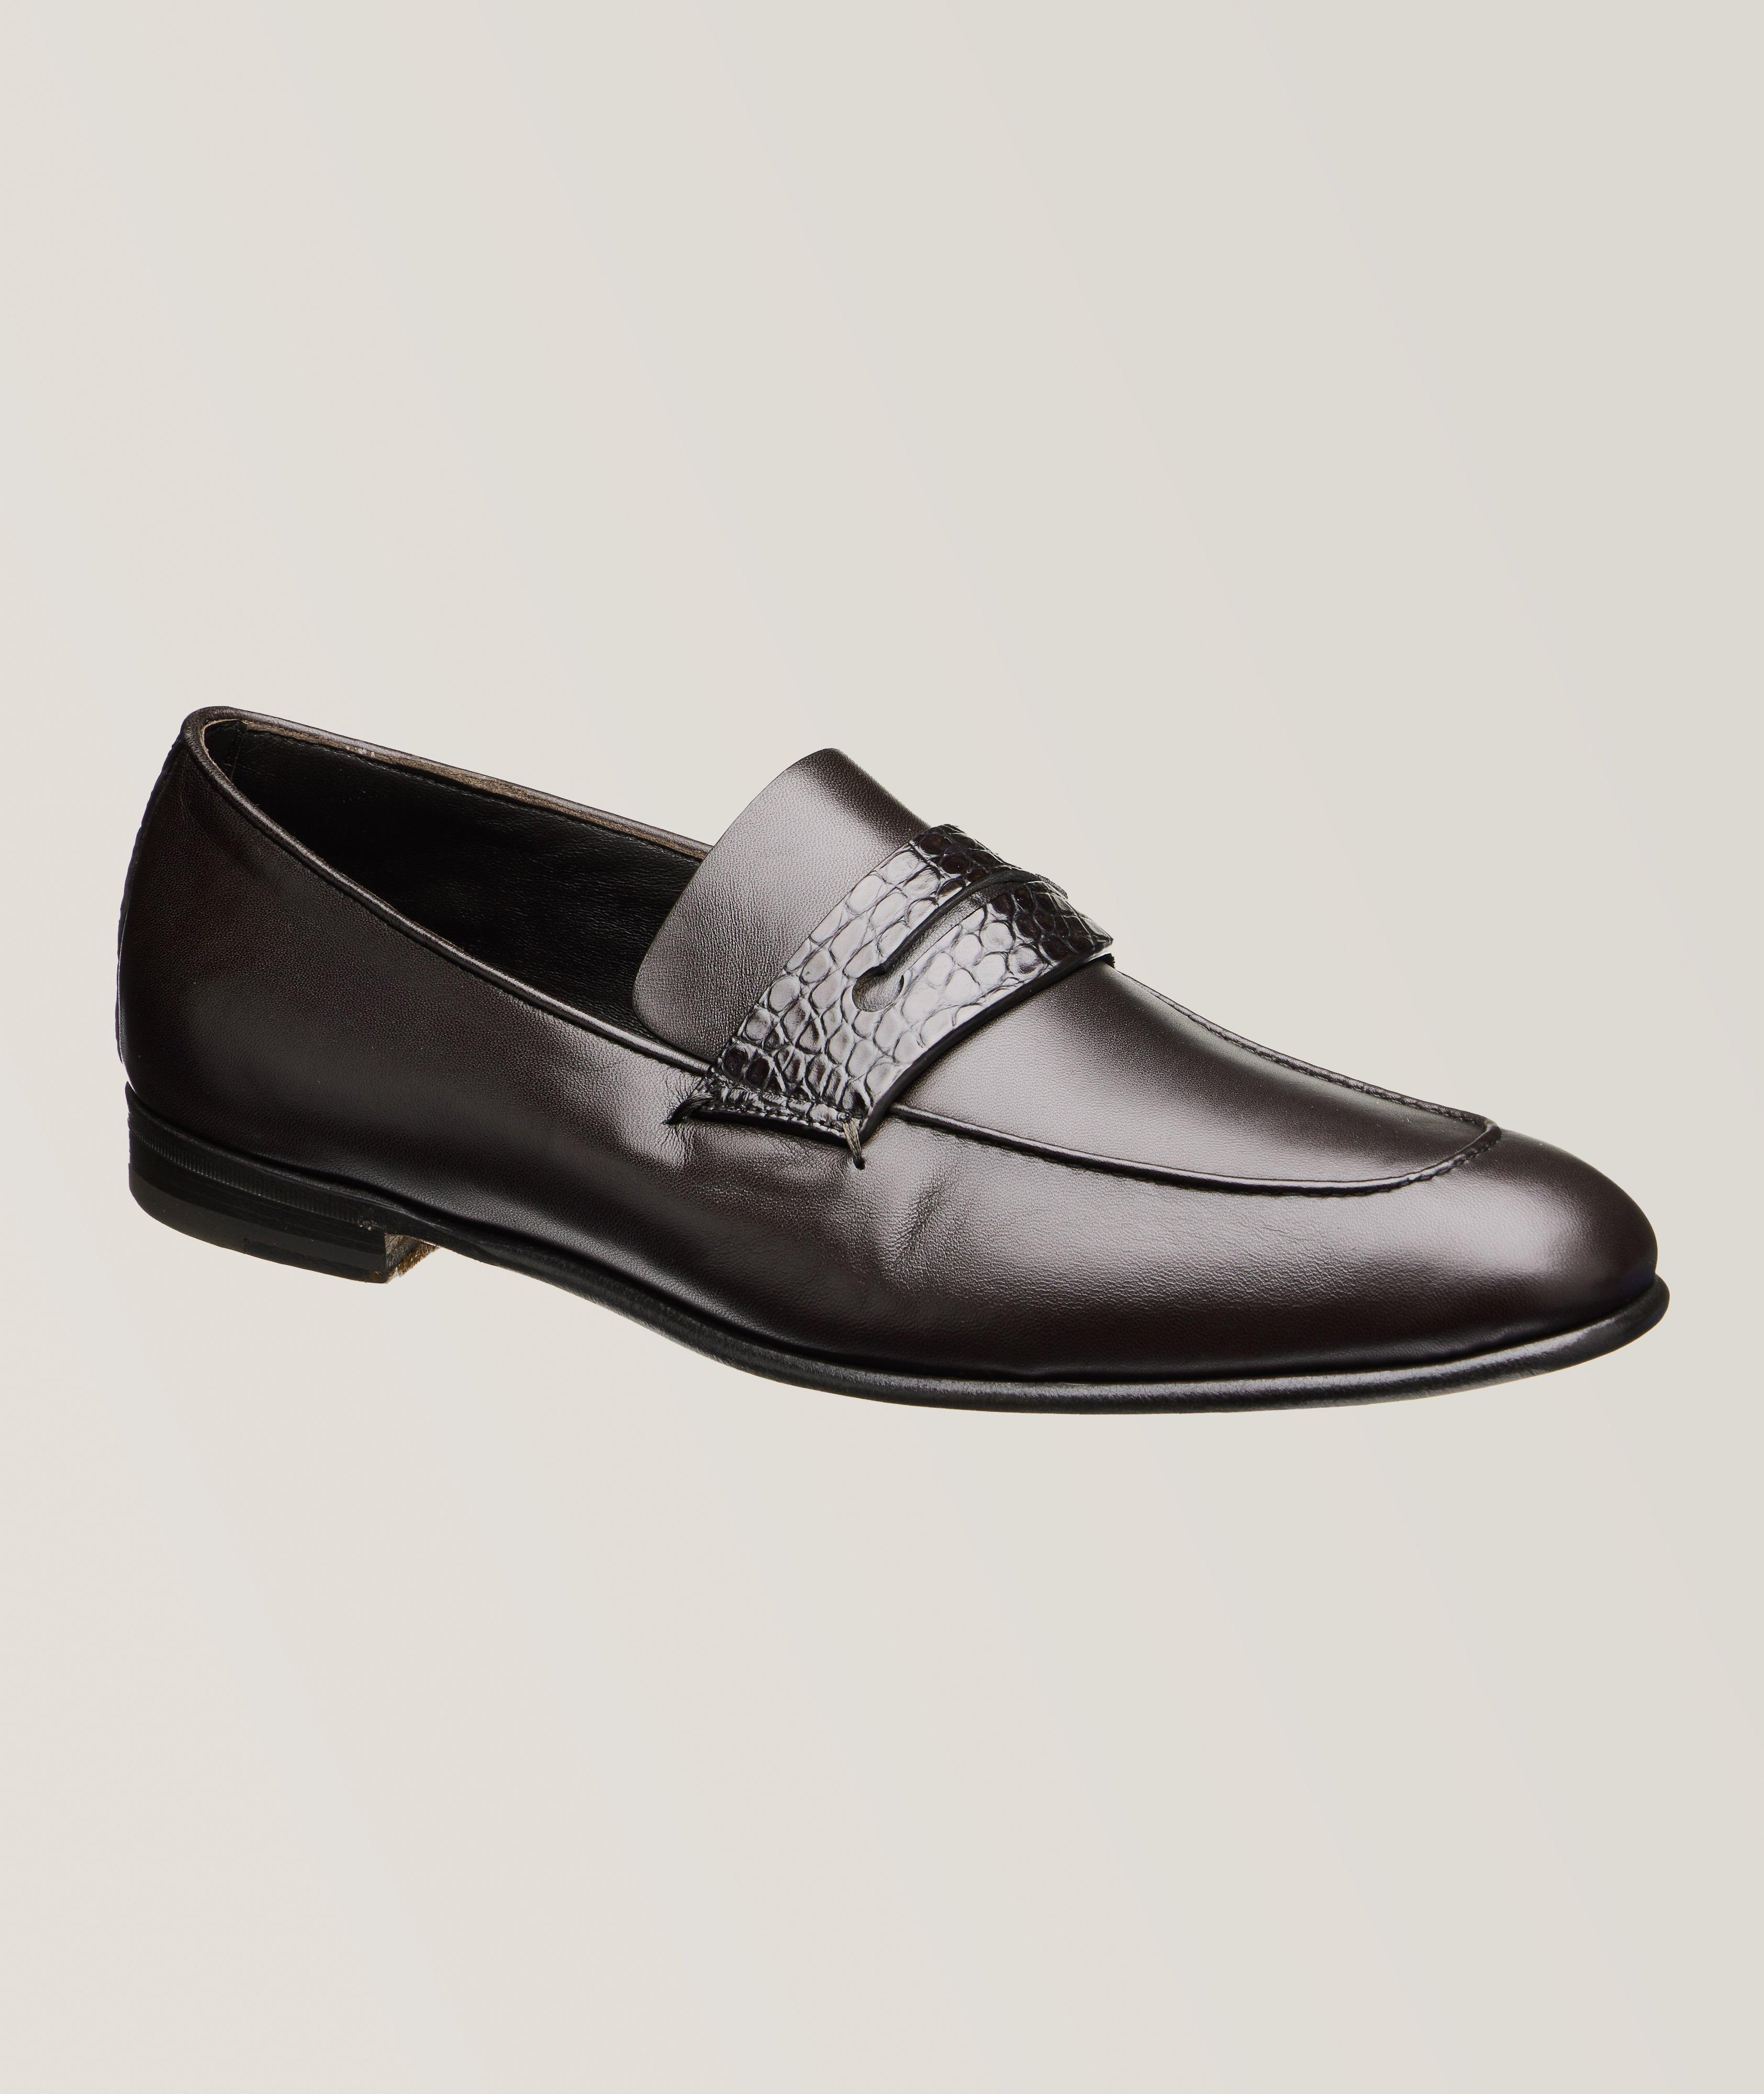 L'Asola Penny Loafers